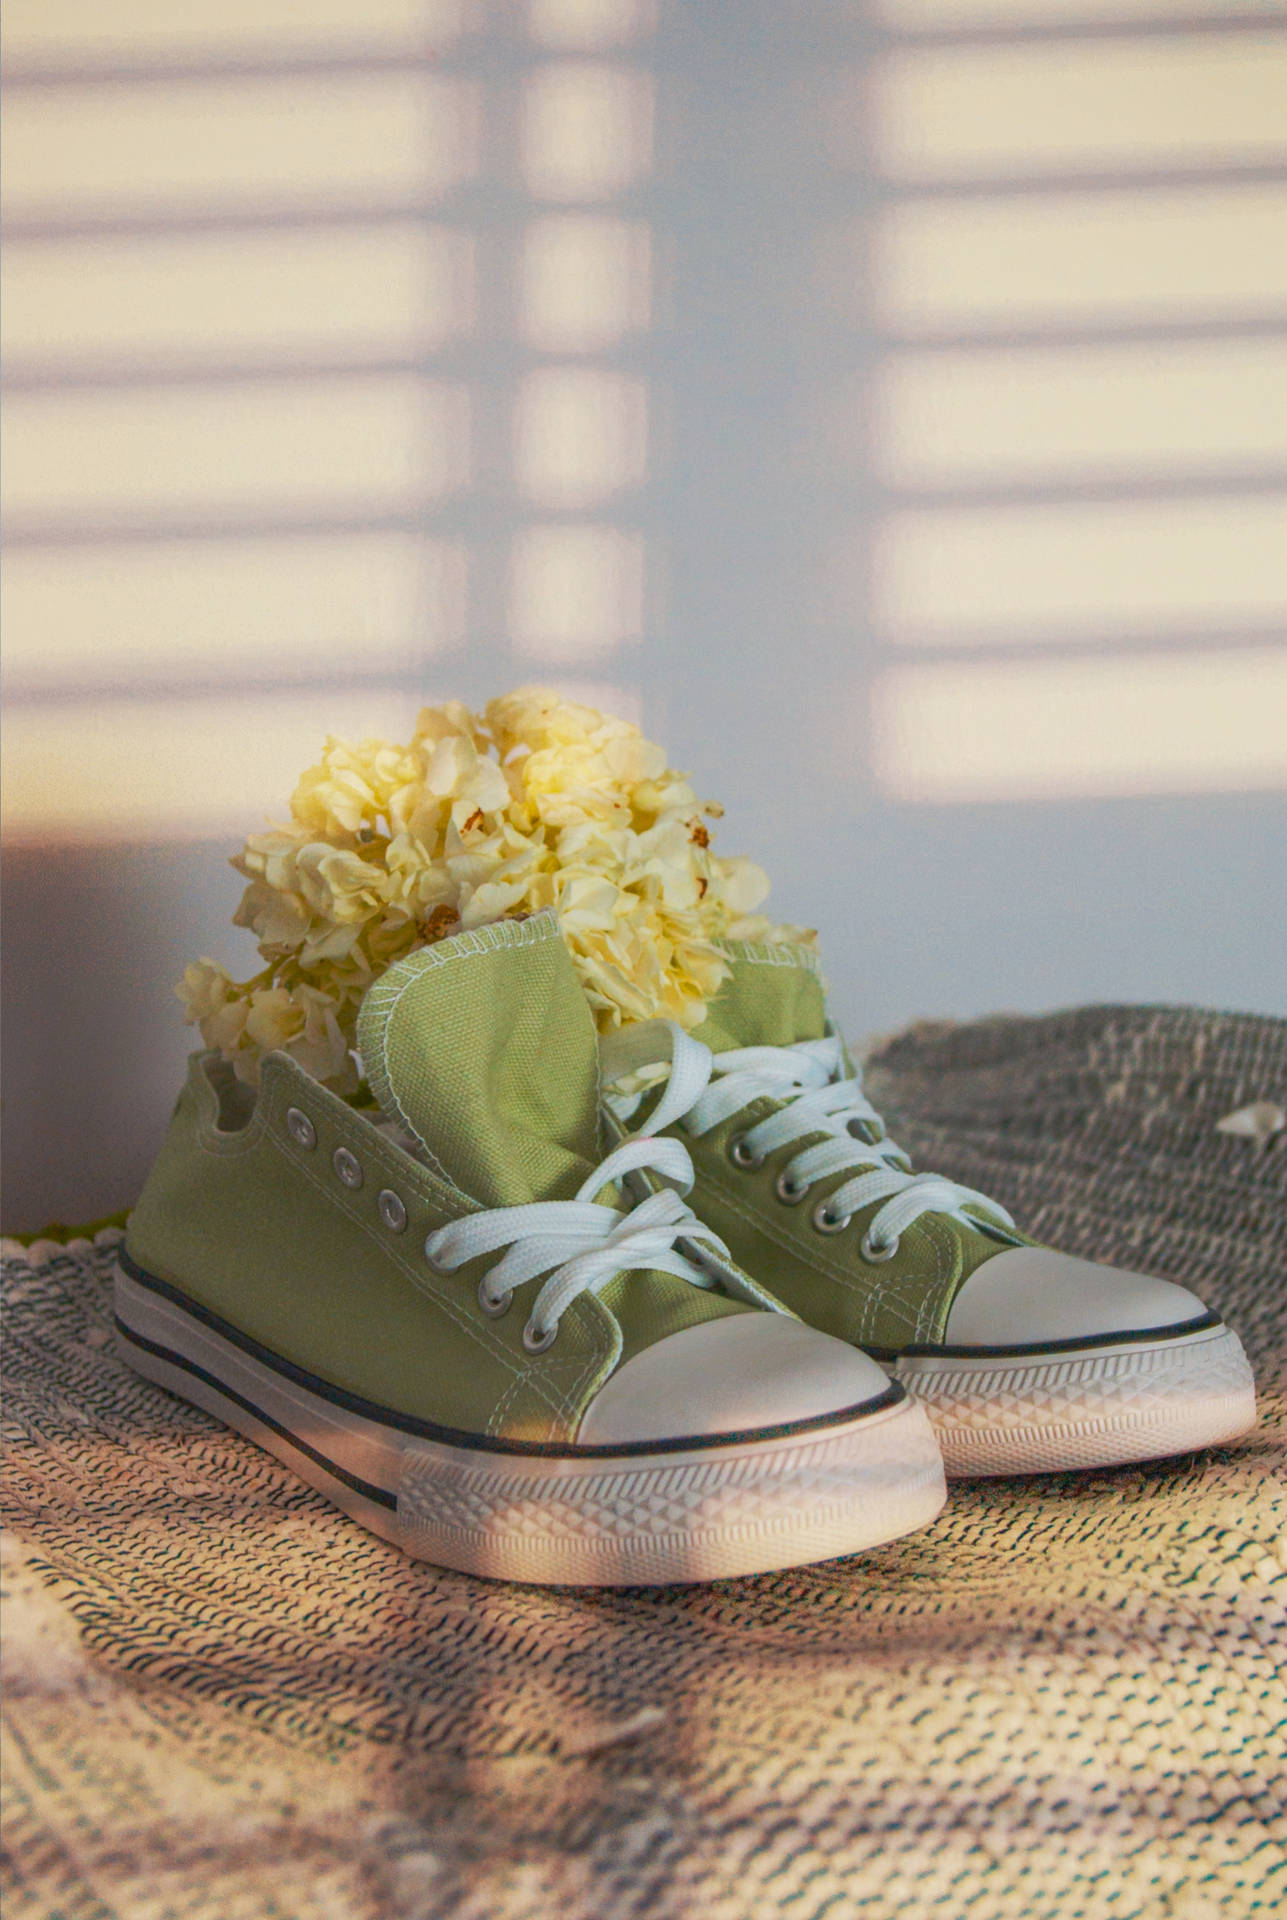 Embrace The Style And Comfort Of These Sleek Green Converse Sneakers. Background